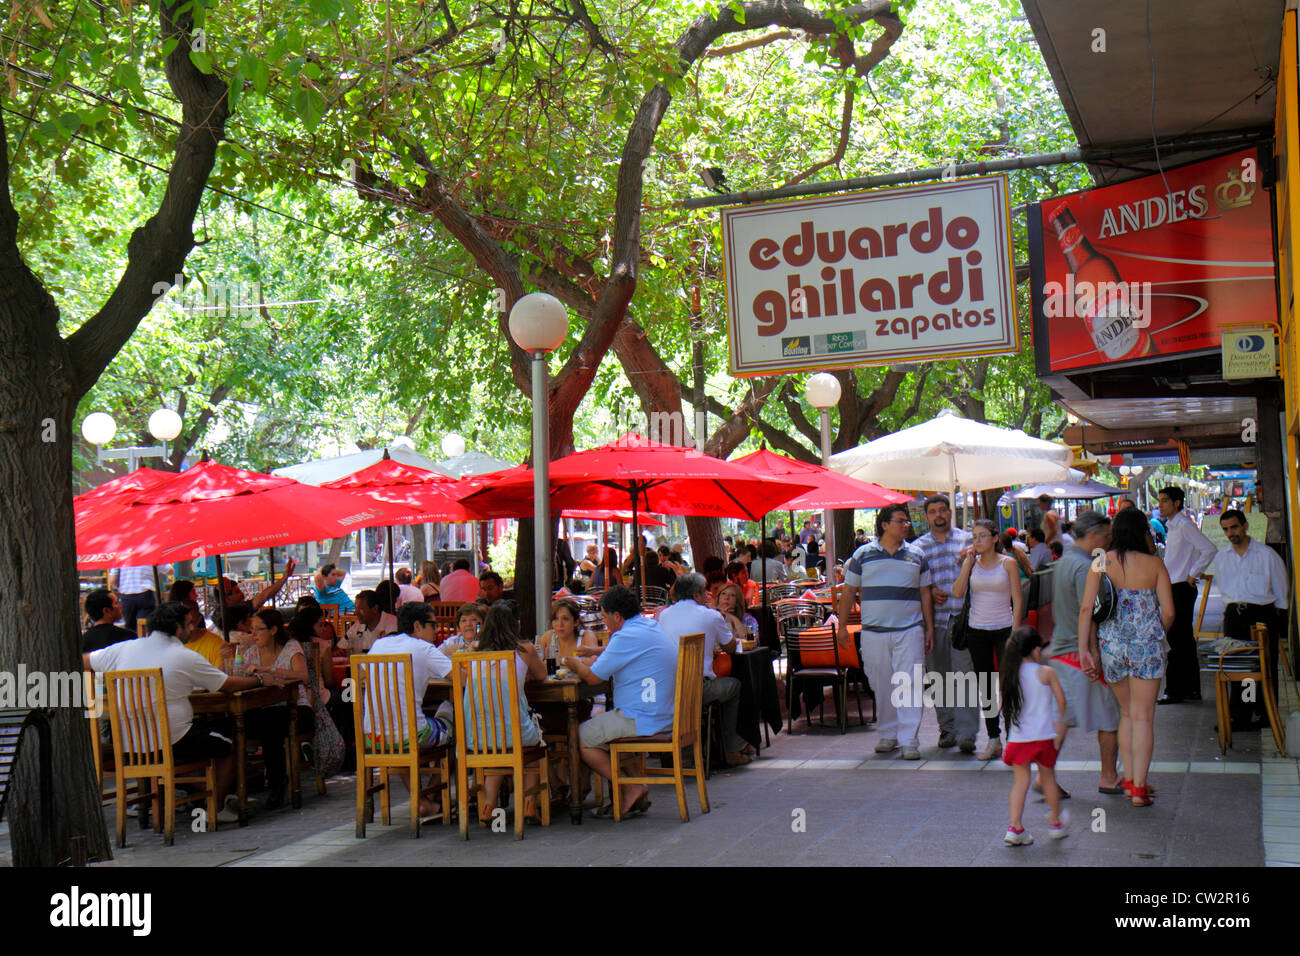 Mendoza Argentina,Paseo Sarmiento,pedestrian road,cafe,al fresco sidewalk outside outdoors tables,dining,restaurant restaurants food dining eating out Stock Photo